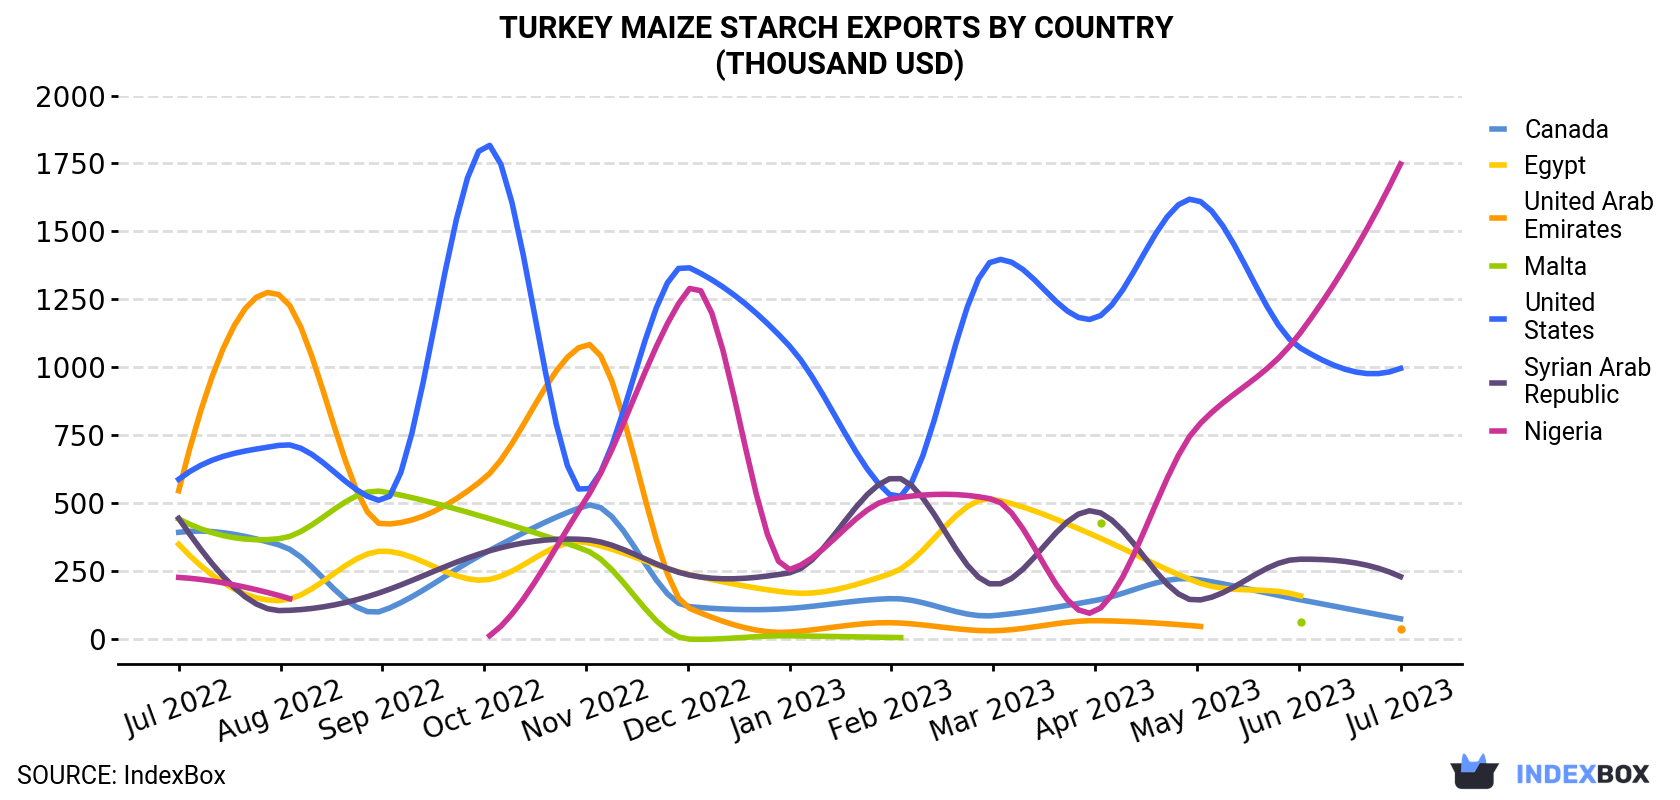 Turkey Maize Starch Exports By Country (Thousand USD)